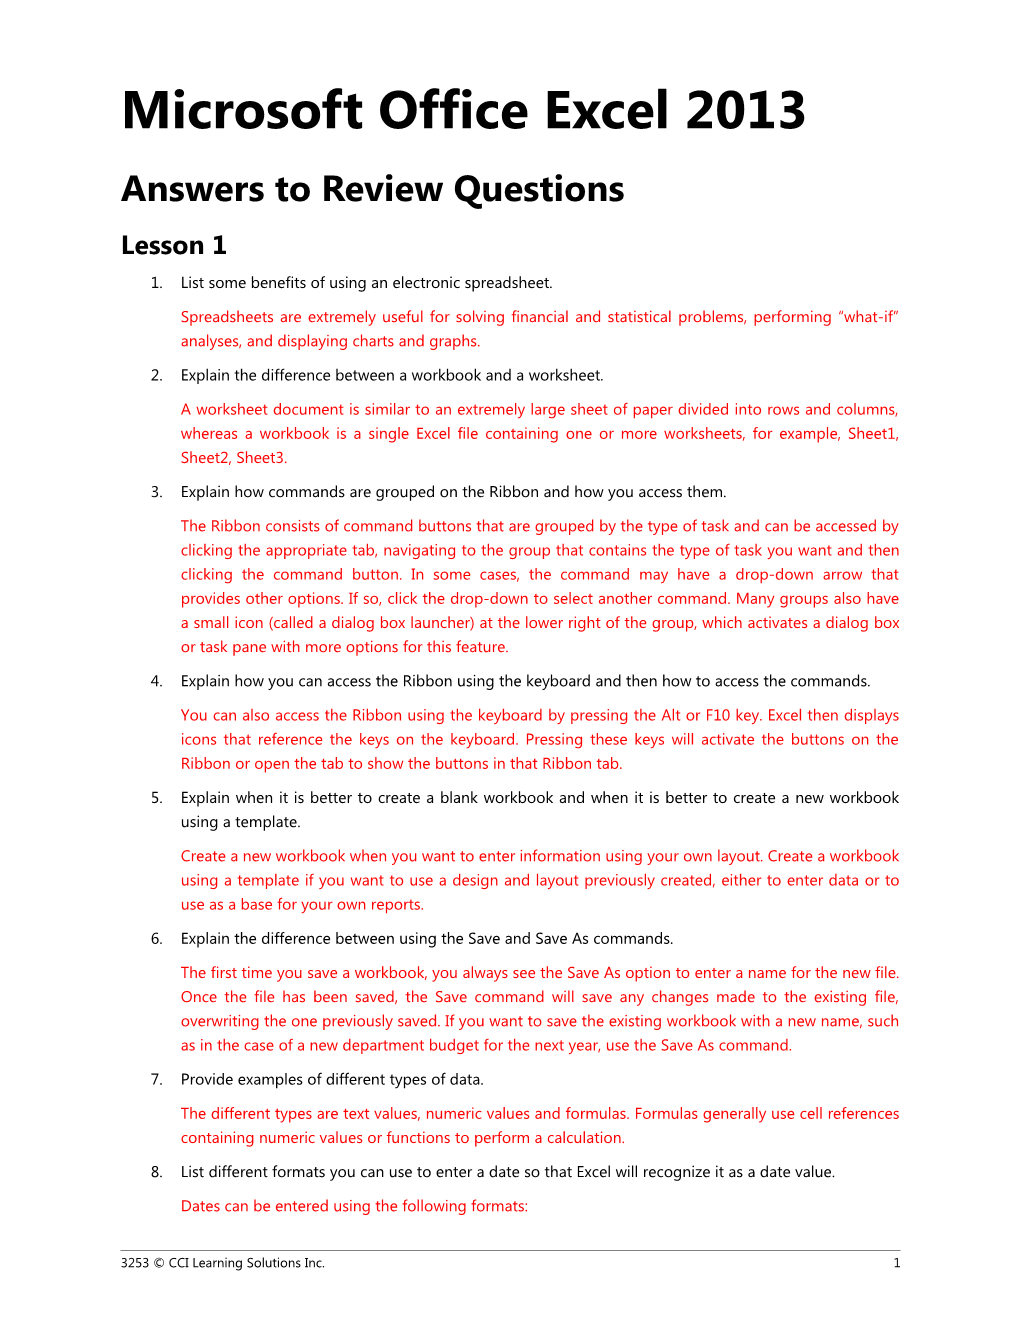 Review Questions Answer Key